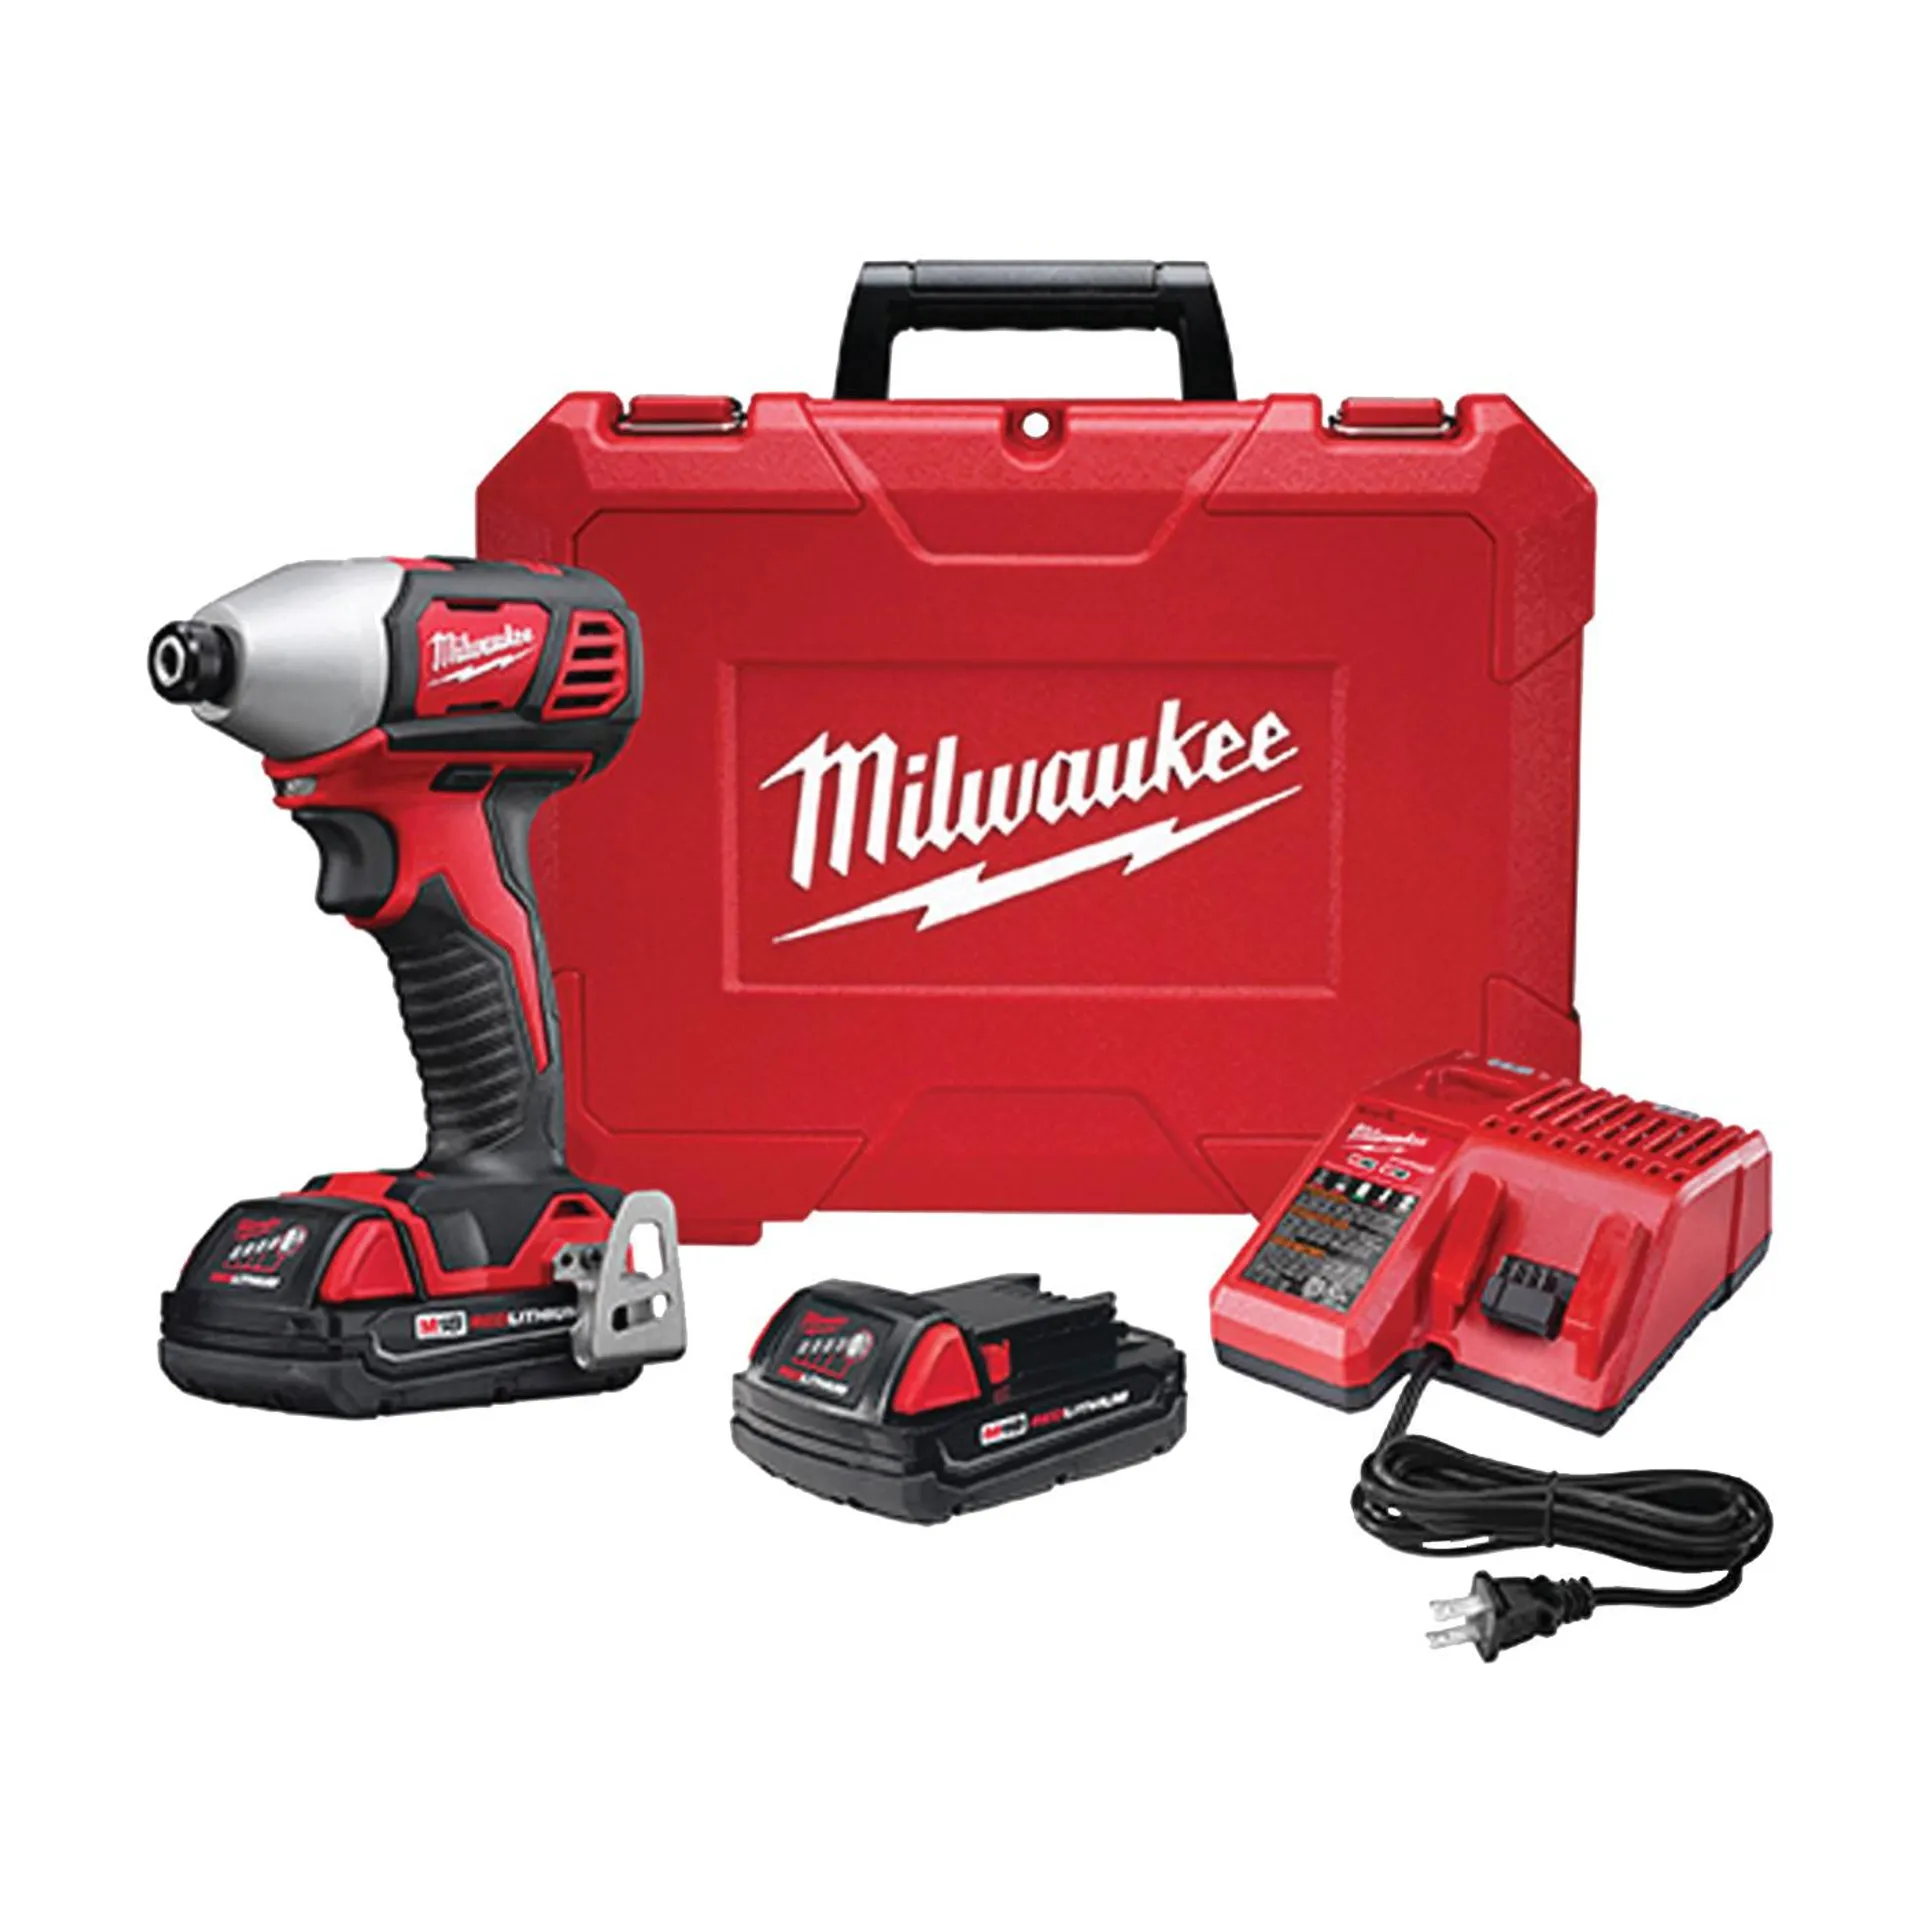 2657-22CT Impact Driver Kit, Battery Included, 18 V, 1.5 Ah, 1/4 in Drive, Hex Drive, 3350 ipm